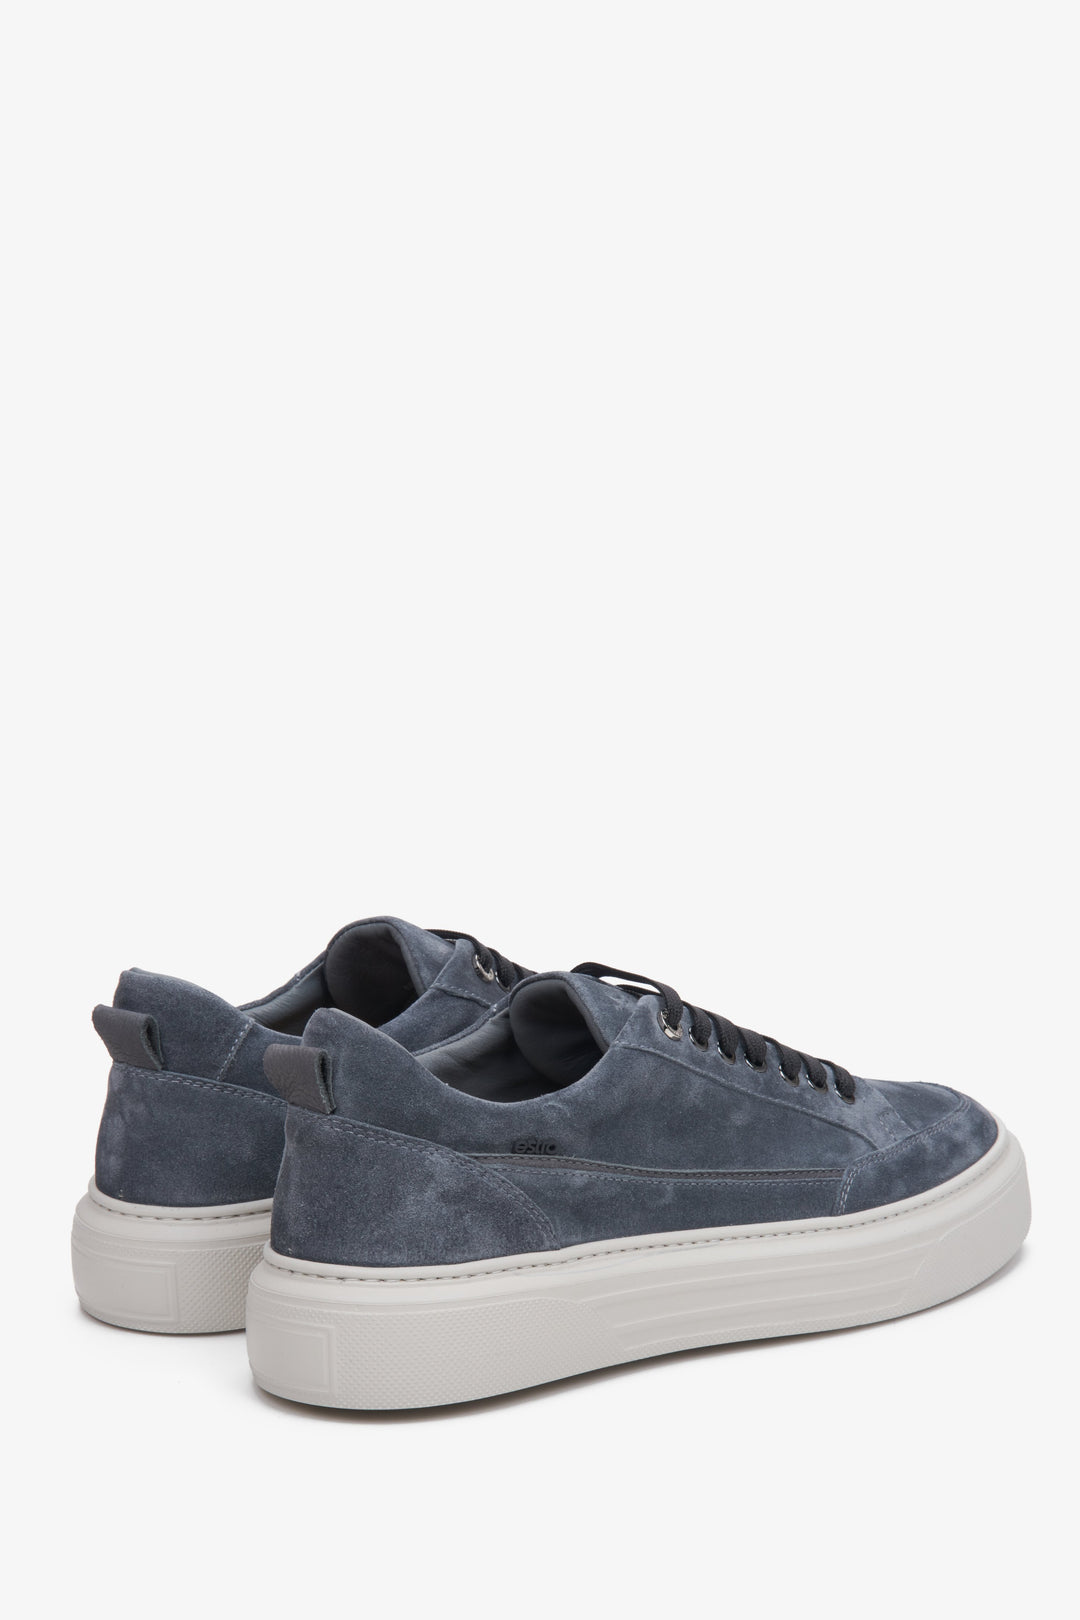 Men's blue velour sneakers with lacing - close-up of the heel.